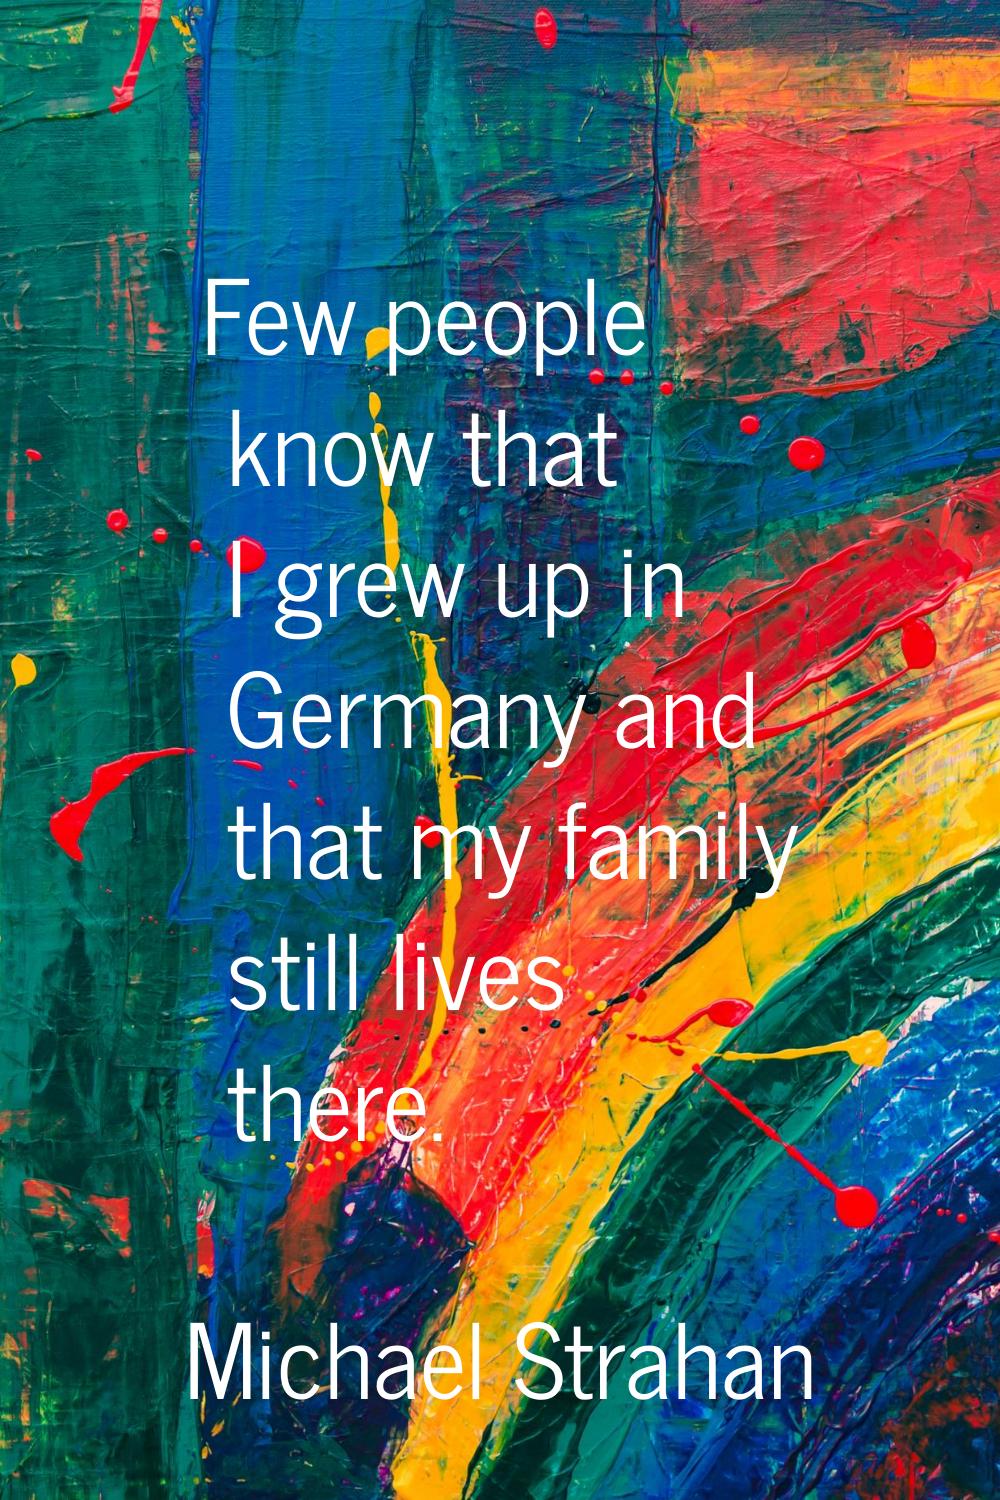 Few people know that I grew up in Germany and that my family still lives there.